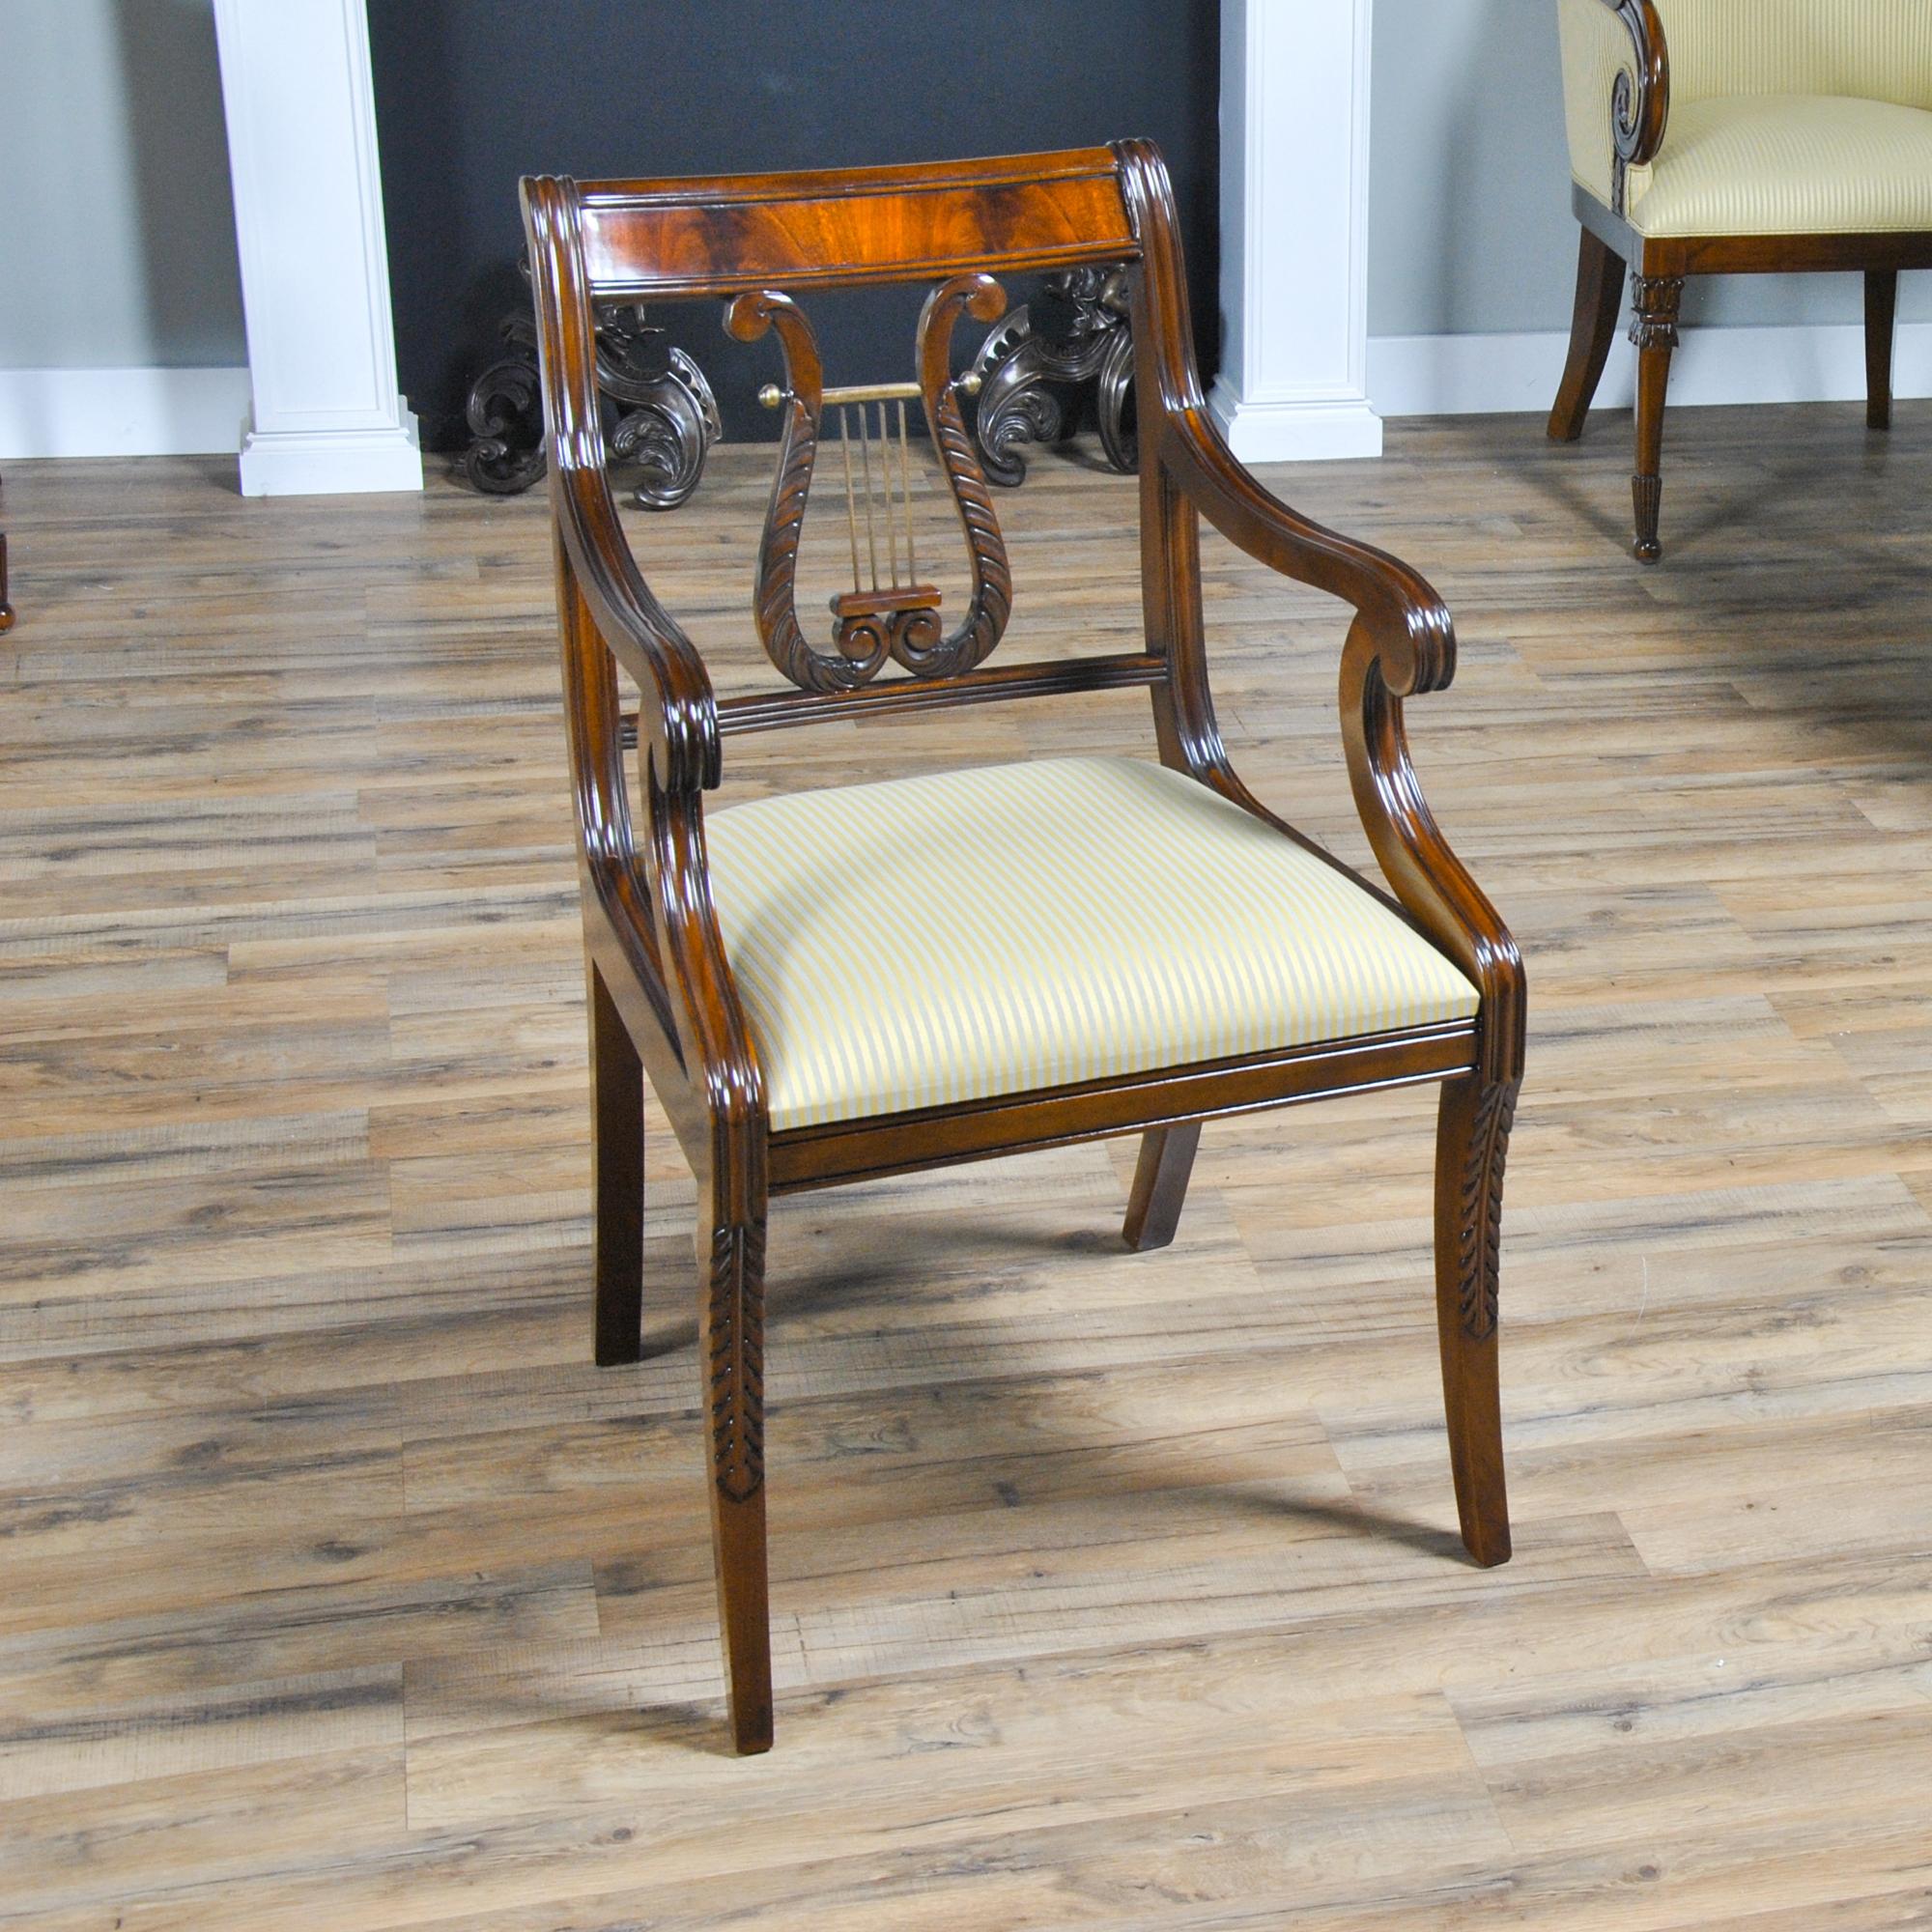 This fine quality set of ten Lyre Chair or Harp Back Chairs consist of 2 arm chairs and eight side chairs. Each chair proudly displays hand carved details throughout it’s entire construction. Top rails feature figured mahogany veneers and the center